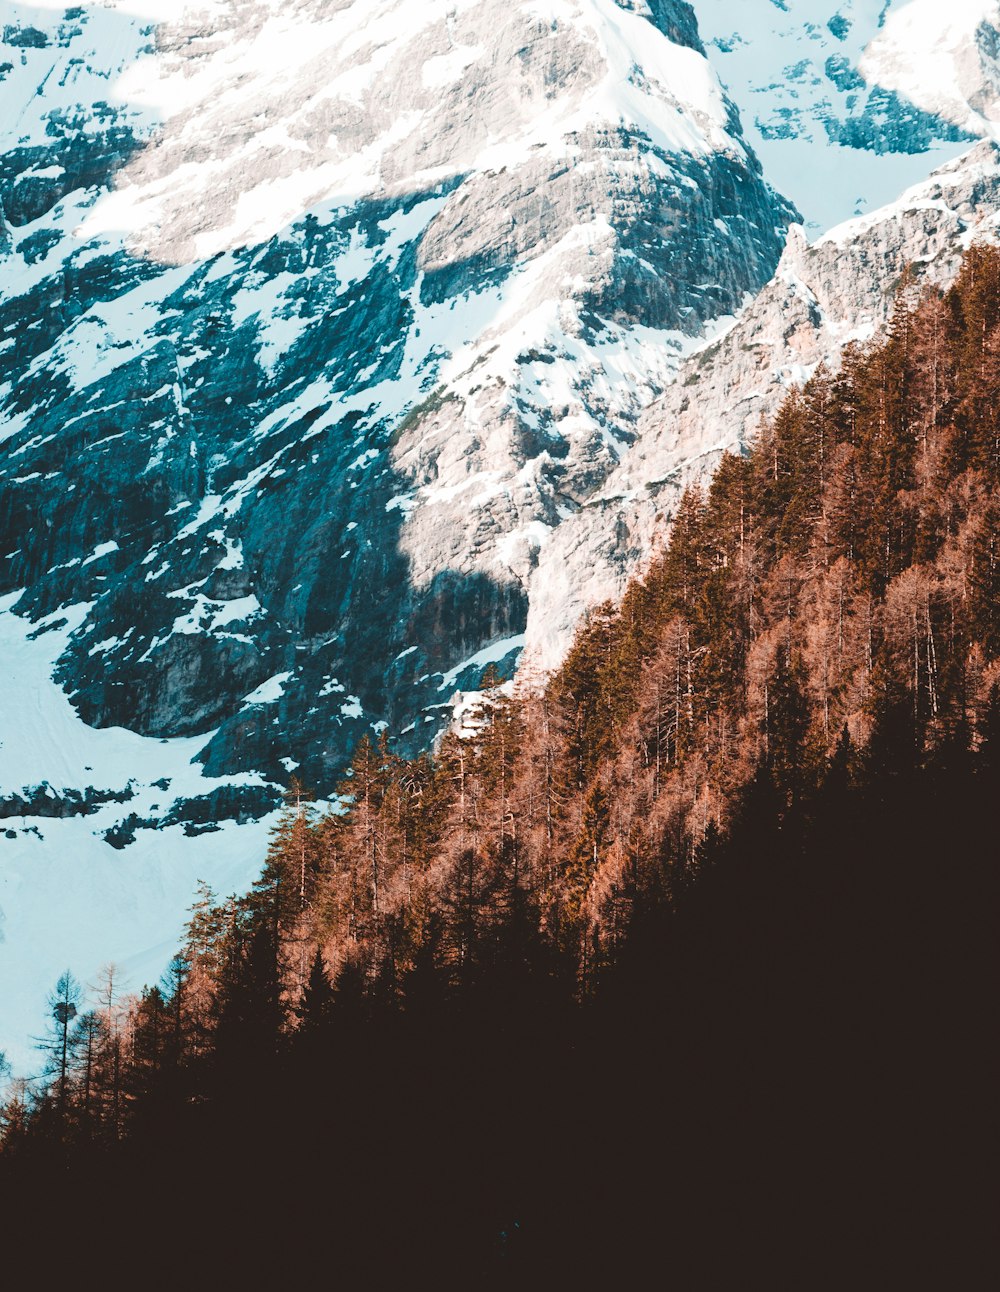 trees on snowy mountain slope